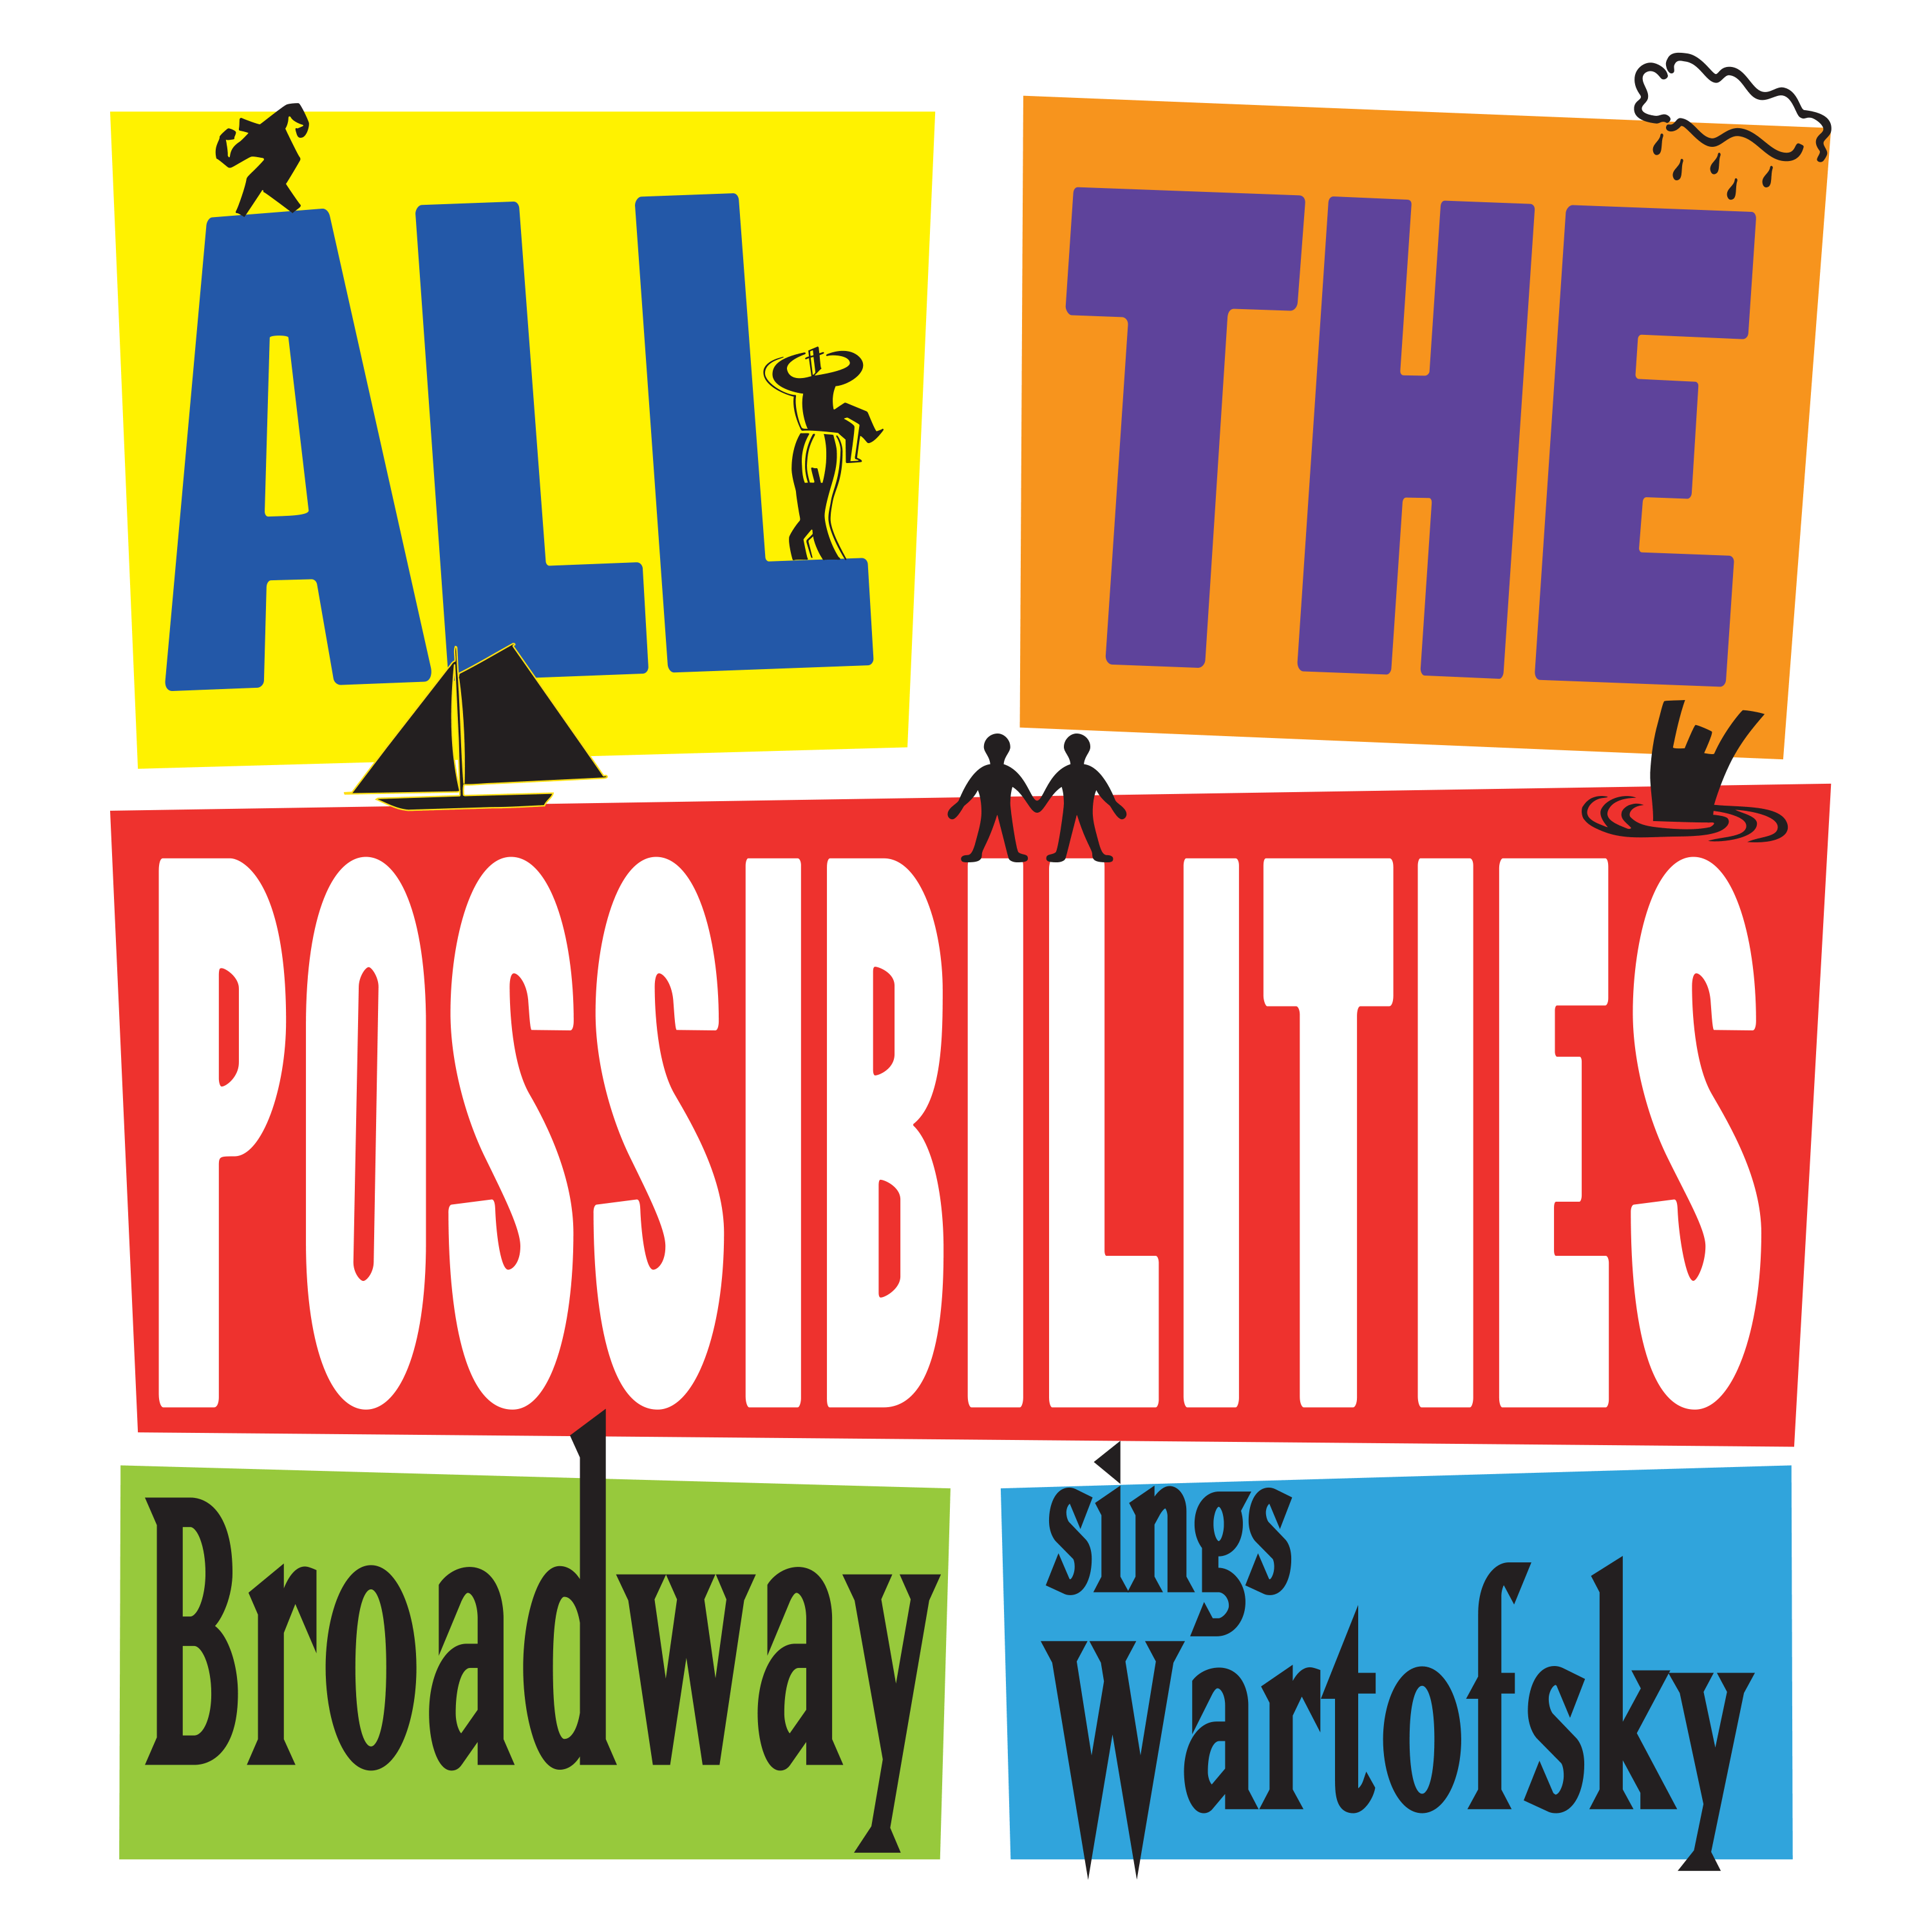 All the Possibilities: Broadway Sings Wartofsky